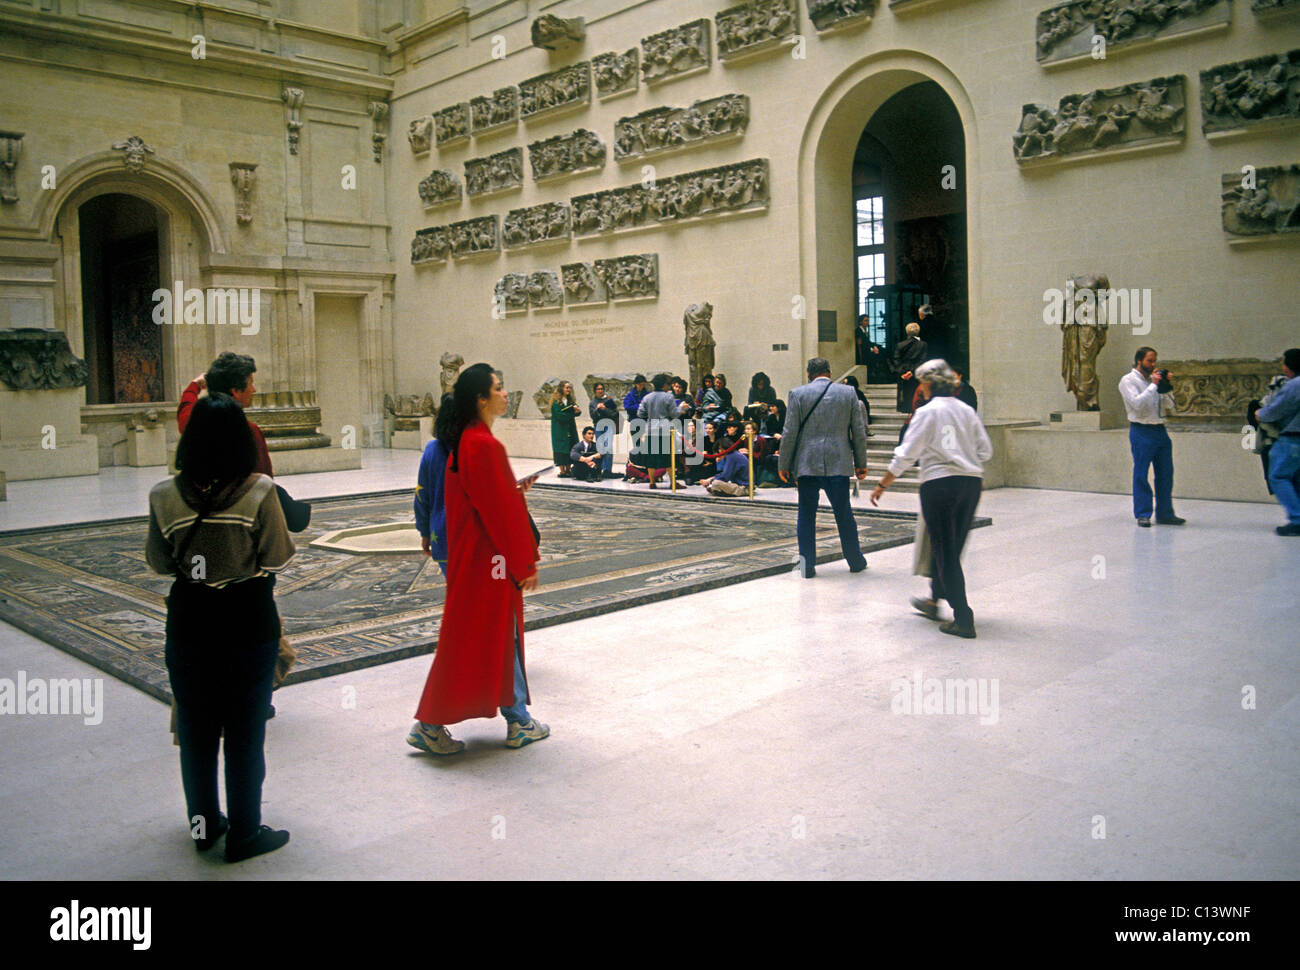 people, tourists visitors viewing the Greek antiquities at Denon Gallery, Louvre Museum, art museum, French museum, Paris, Ile-de-France, France Stock Photo